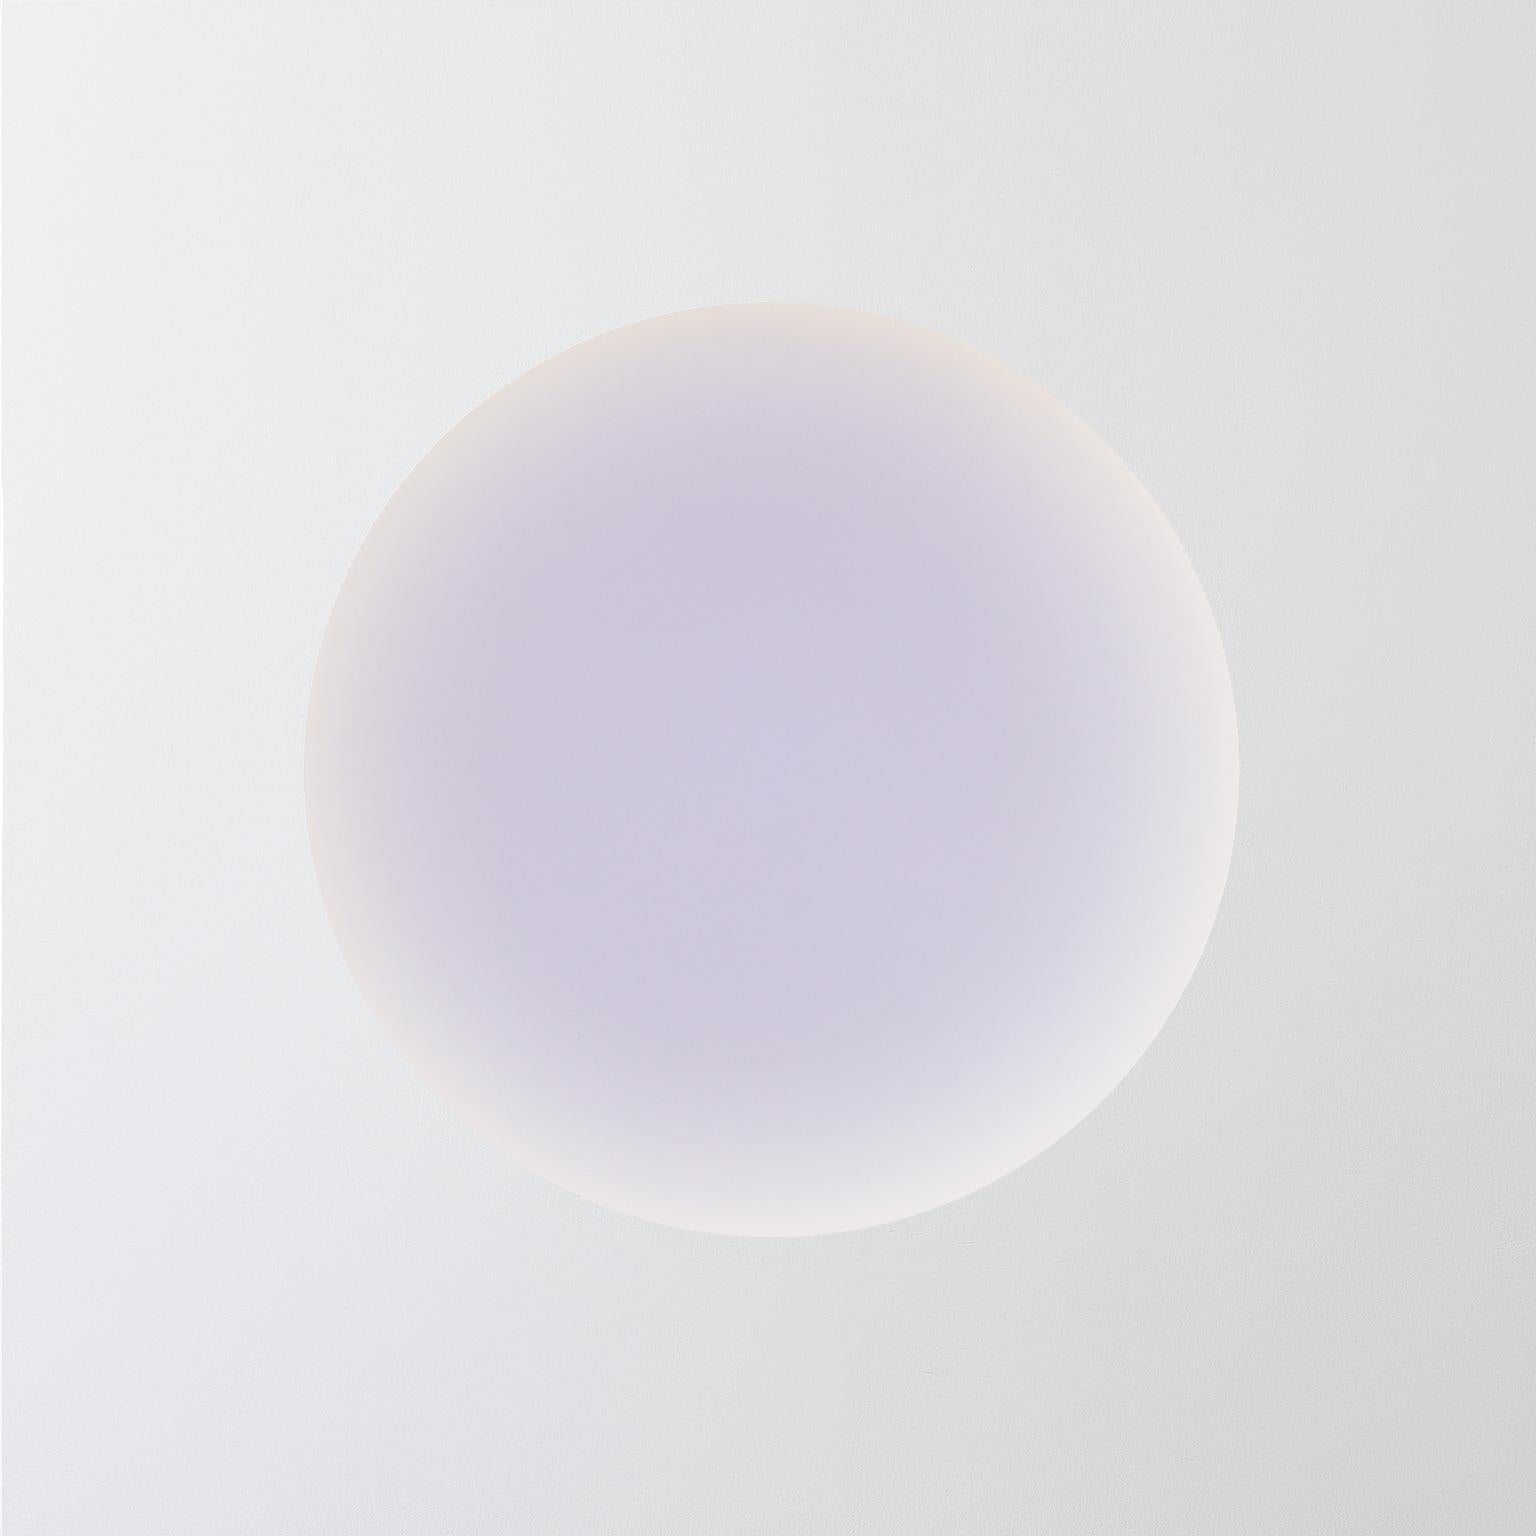 Raymond Graber‘s kinetic light sculpture One Light (2022) incorporates lightwaves as an artistic medium, creating an immersive visual experience with a mesmerizing play of ambient glow in a gradually evolving color spectrum inspired by the